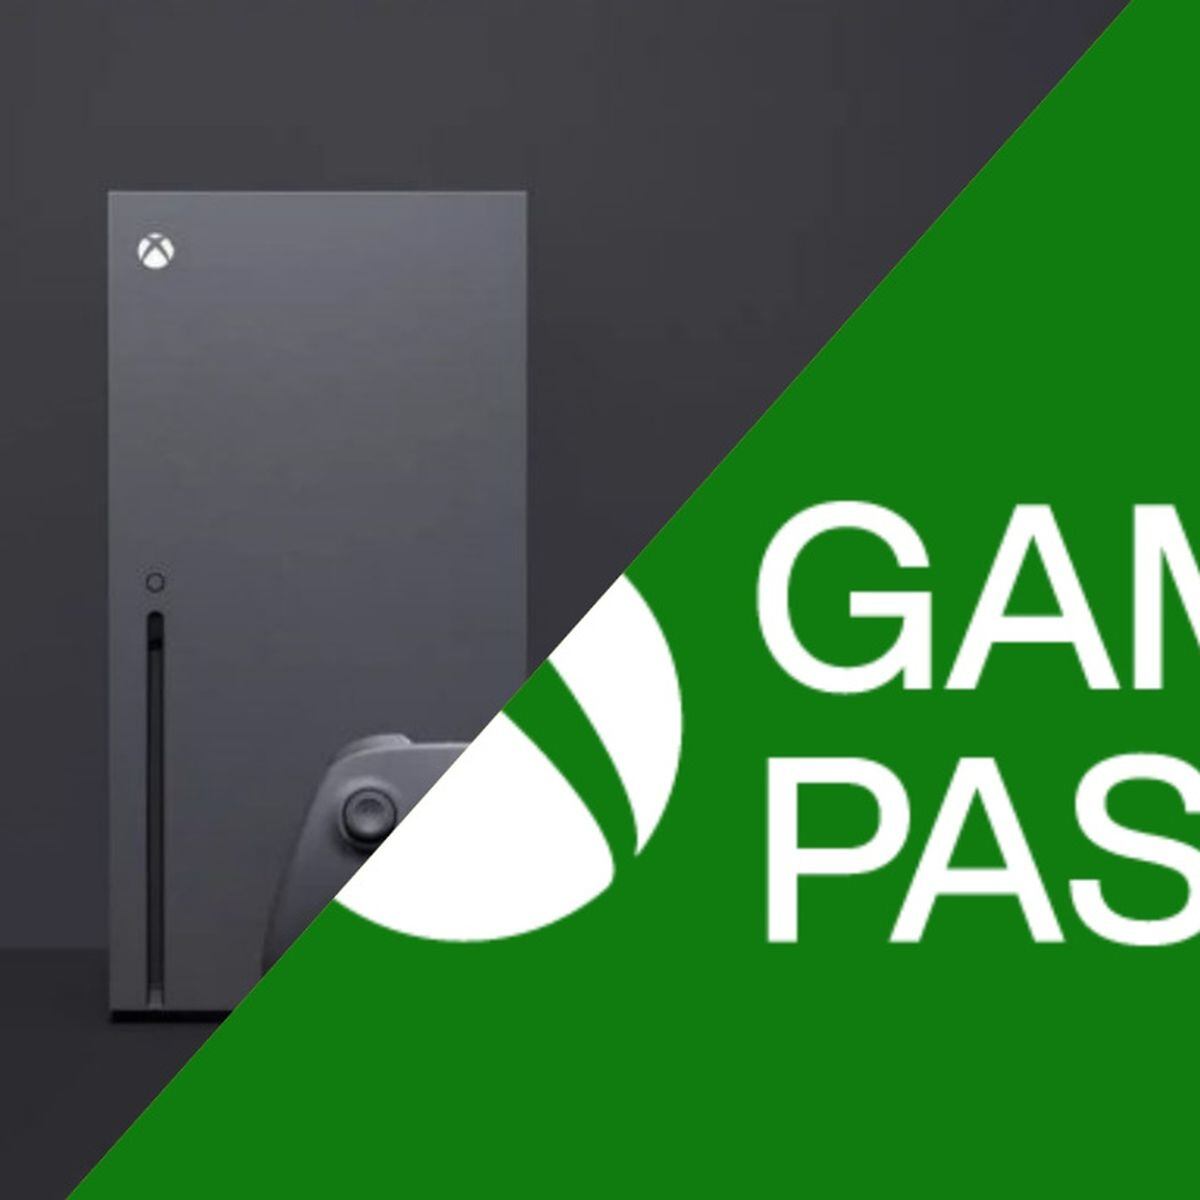 Xbox X Series and Xbox Game Pass prices increase - Meristation